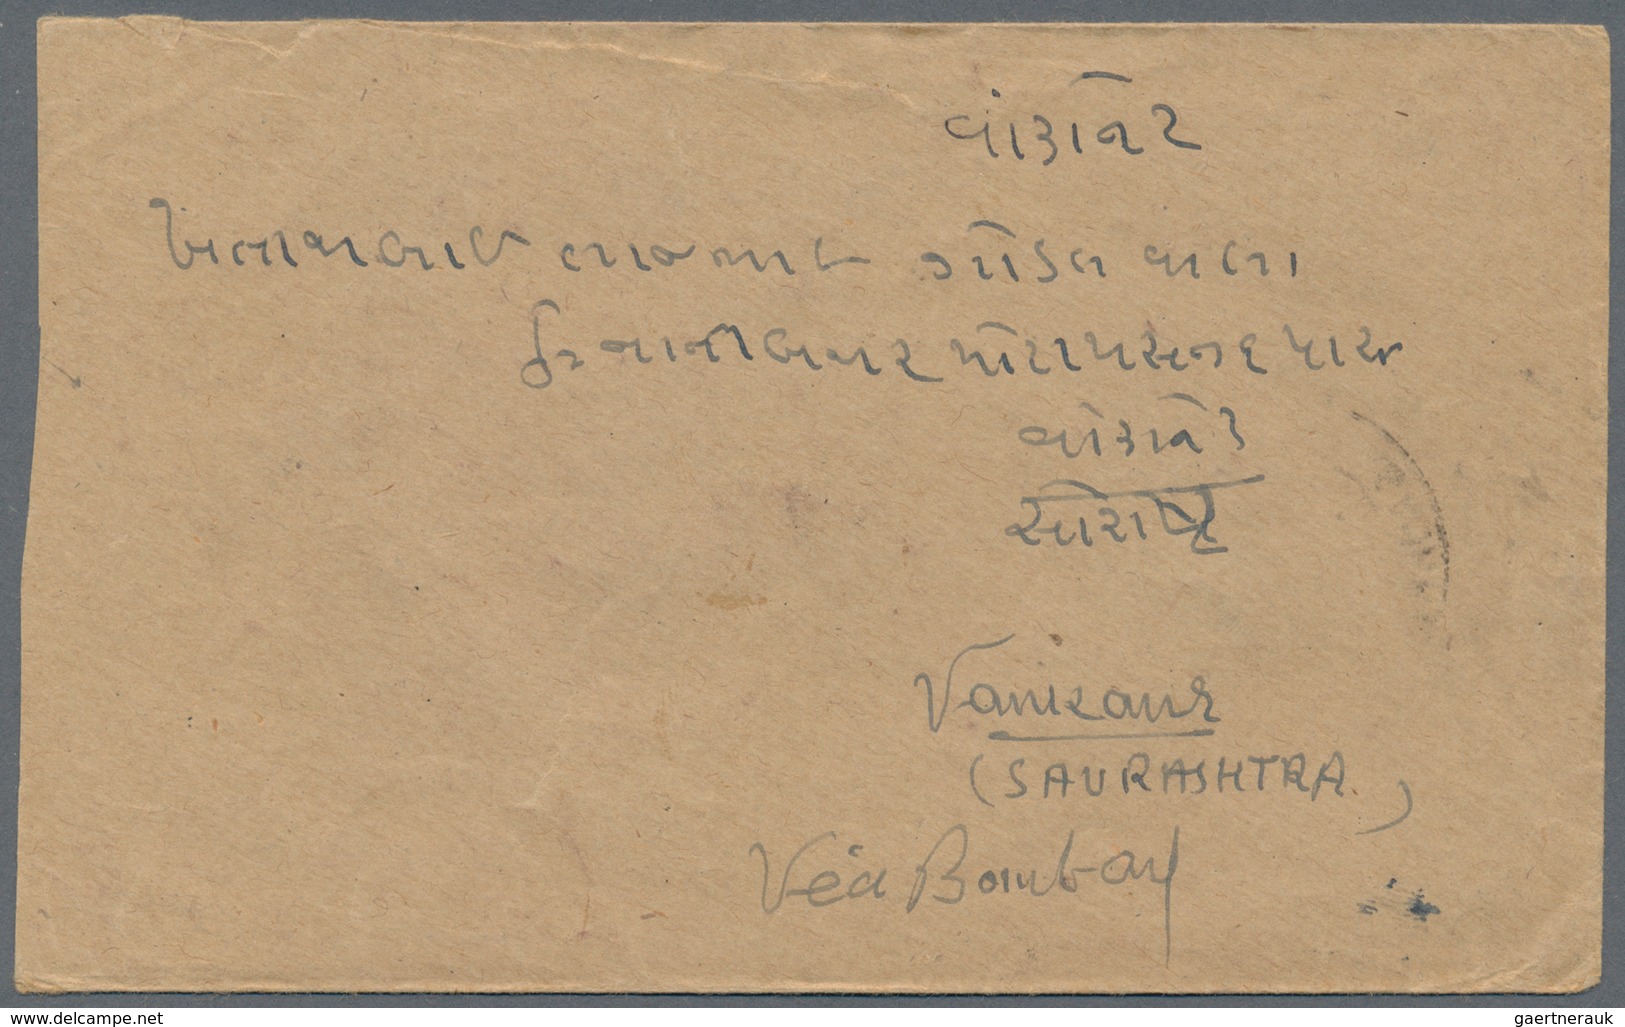 Malediven: 1907/58, covers (10) mostly to India inc. registration and air mail, also inc. two forces